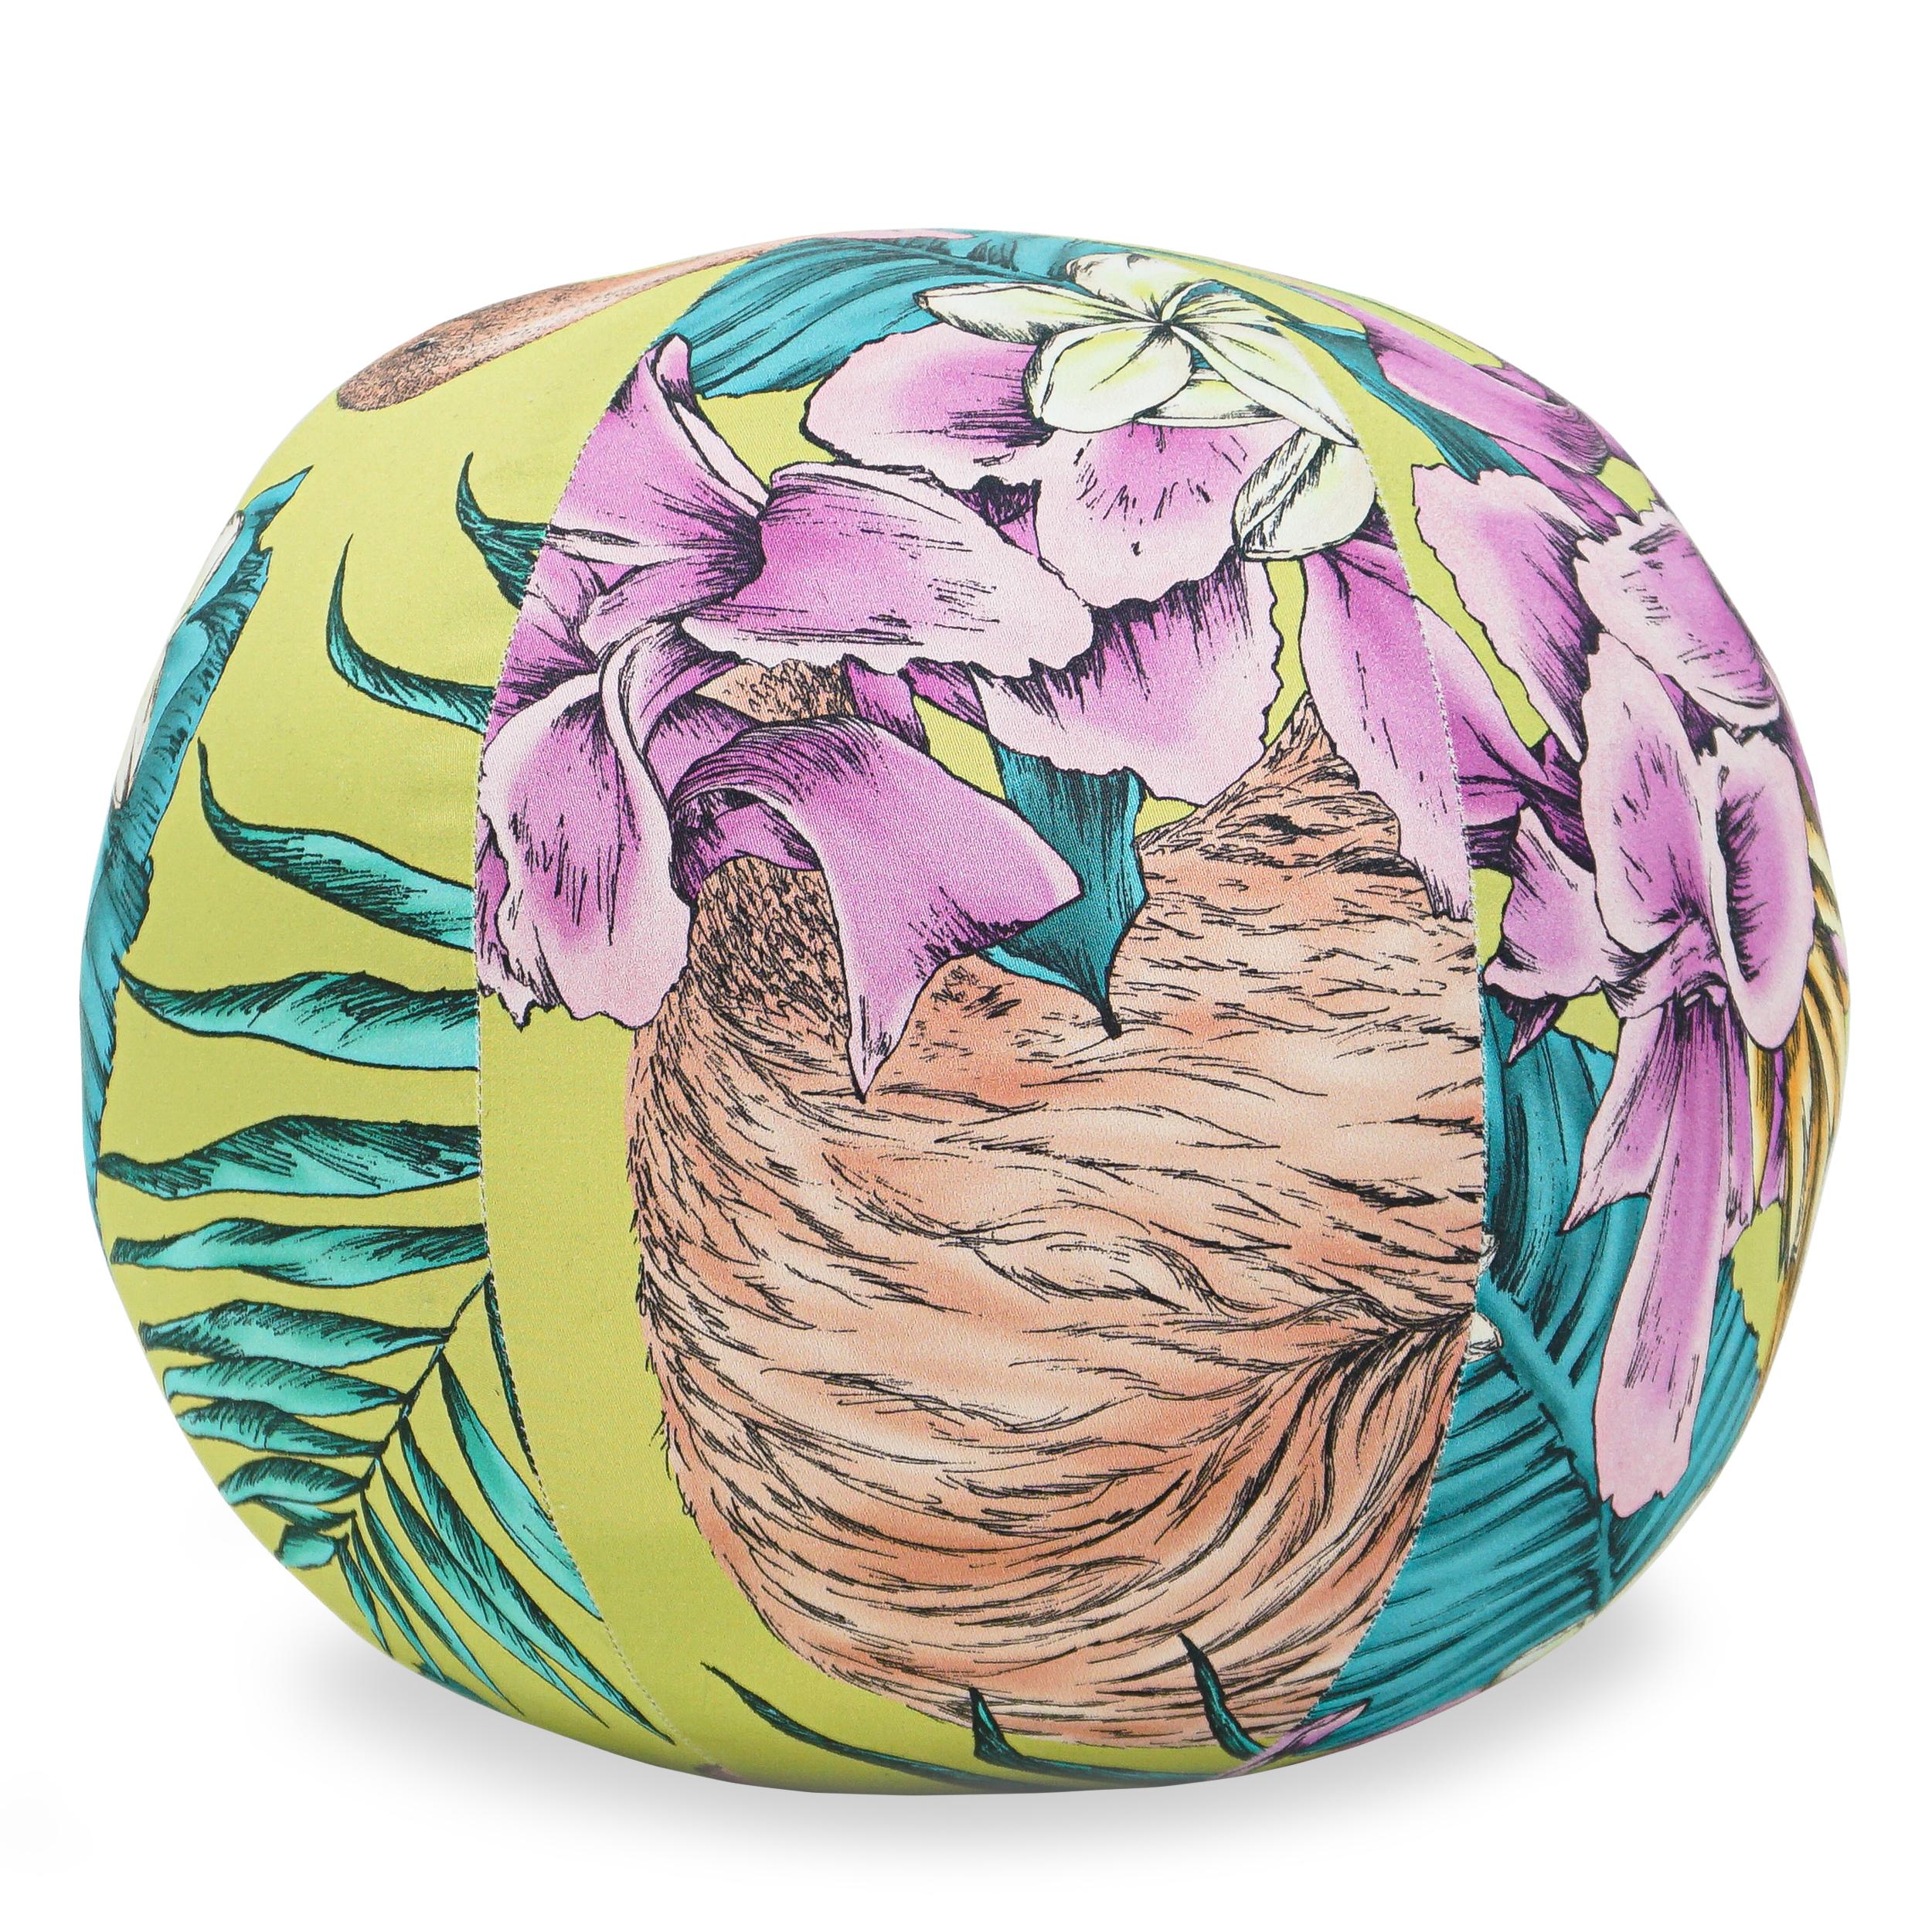 Ball pillow with Matthew Williamson printed 100% cotton. Ask about other colors.

Measurements:
Outside: 12” diameter x 12